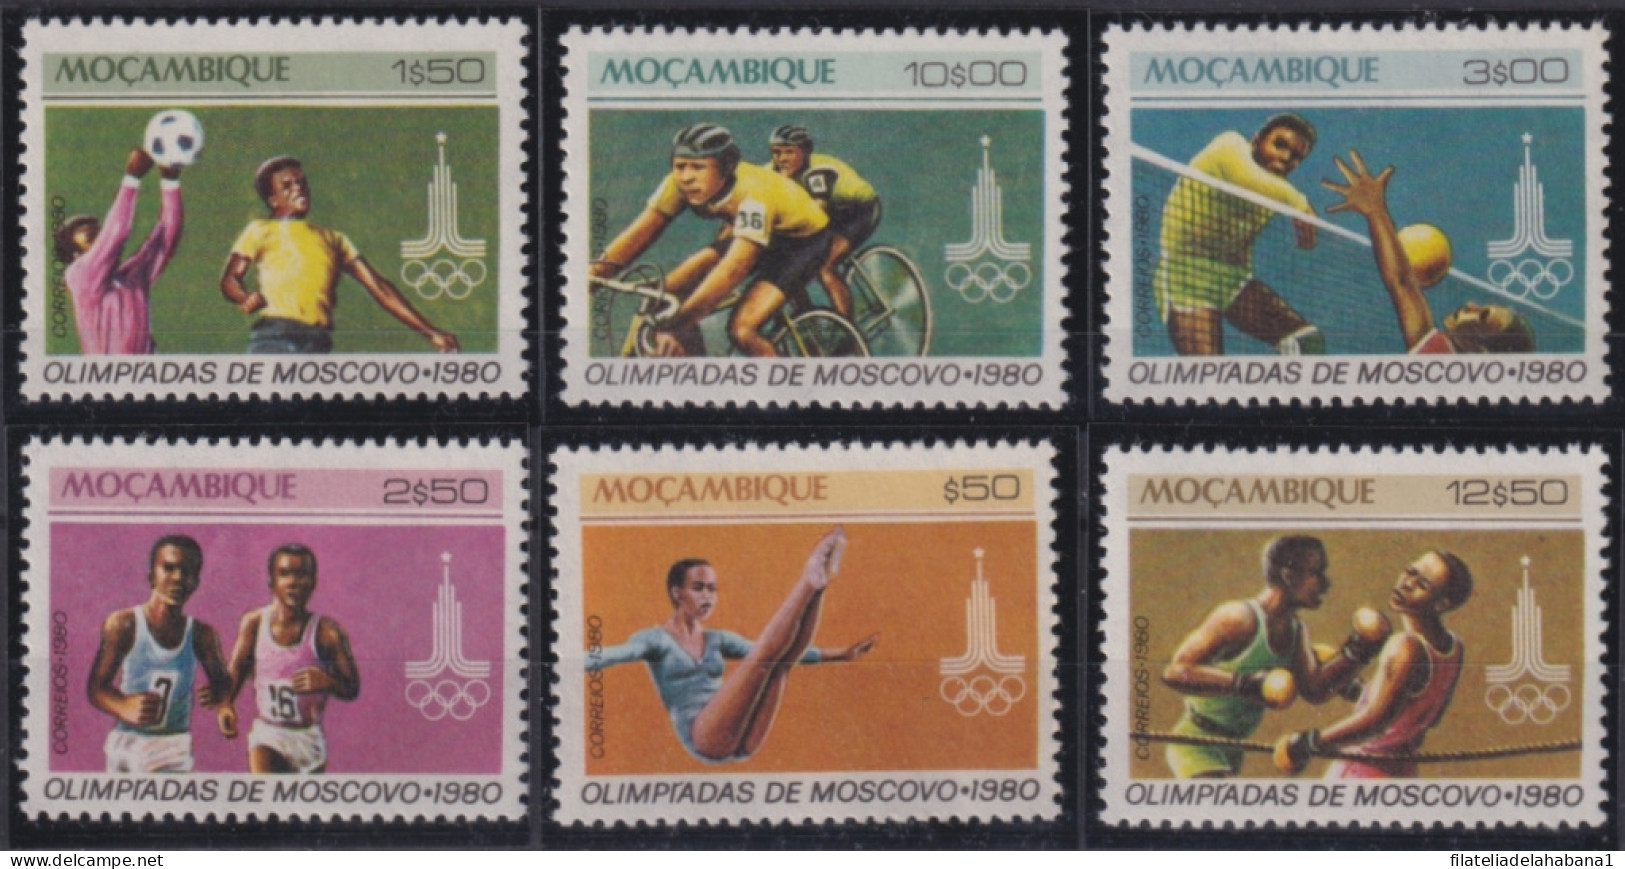 F-EX50250 MOZAMBIQUE MNH 1980 OLYMPIC GAMES MOSCOW CYCLING BOXING ATHLETISM BASKET.  - Verano 1980: Moscu